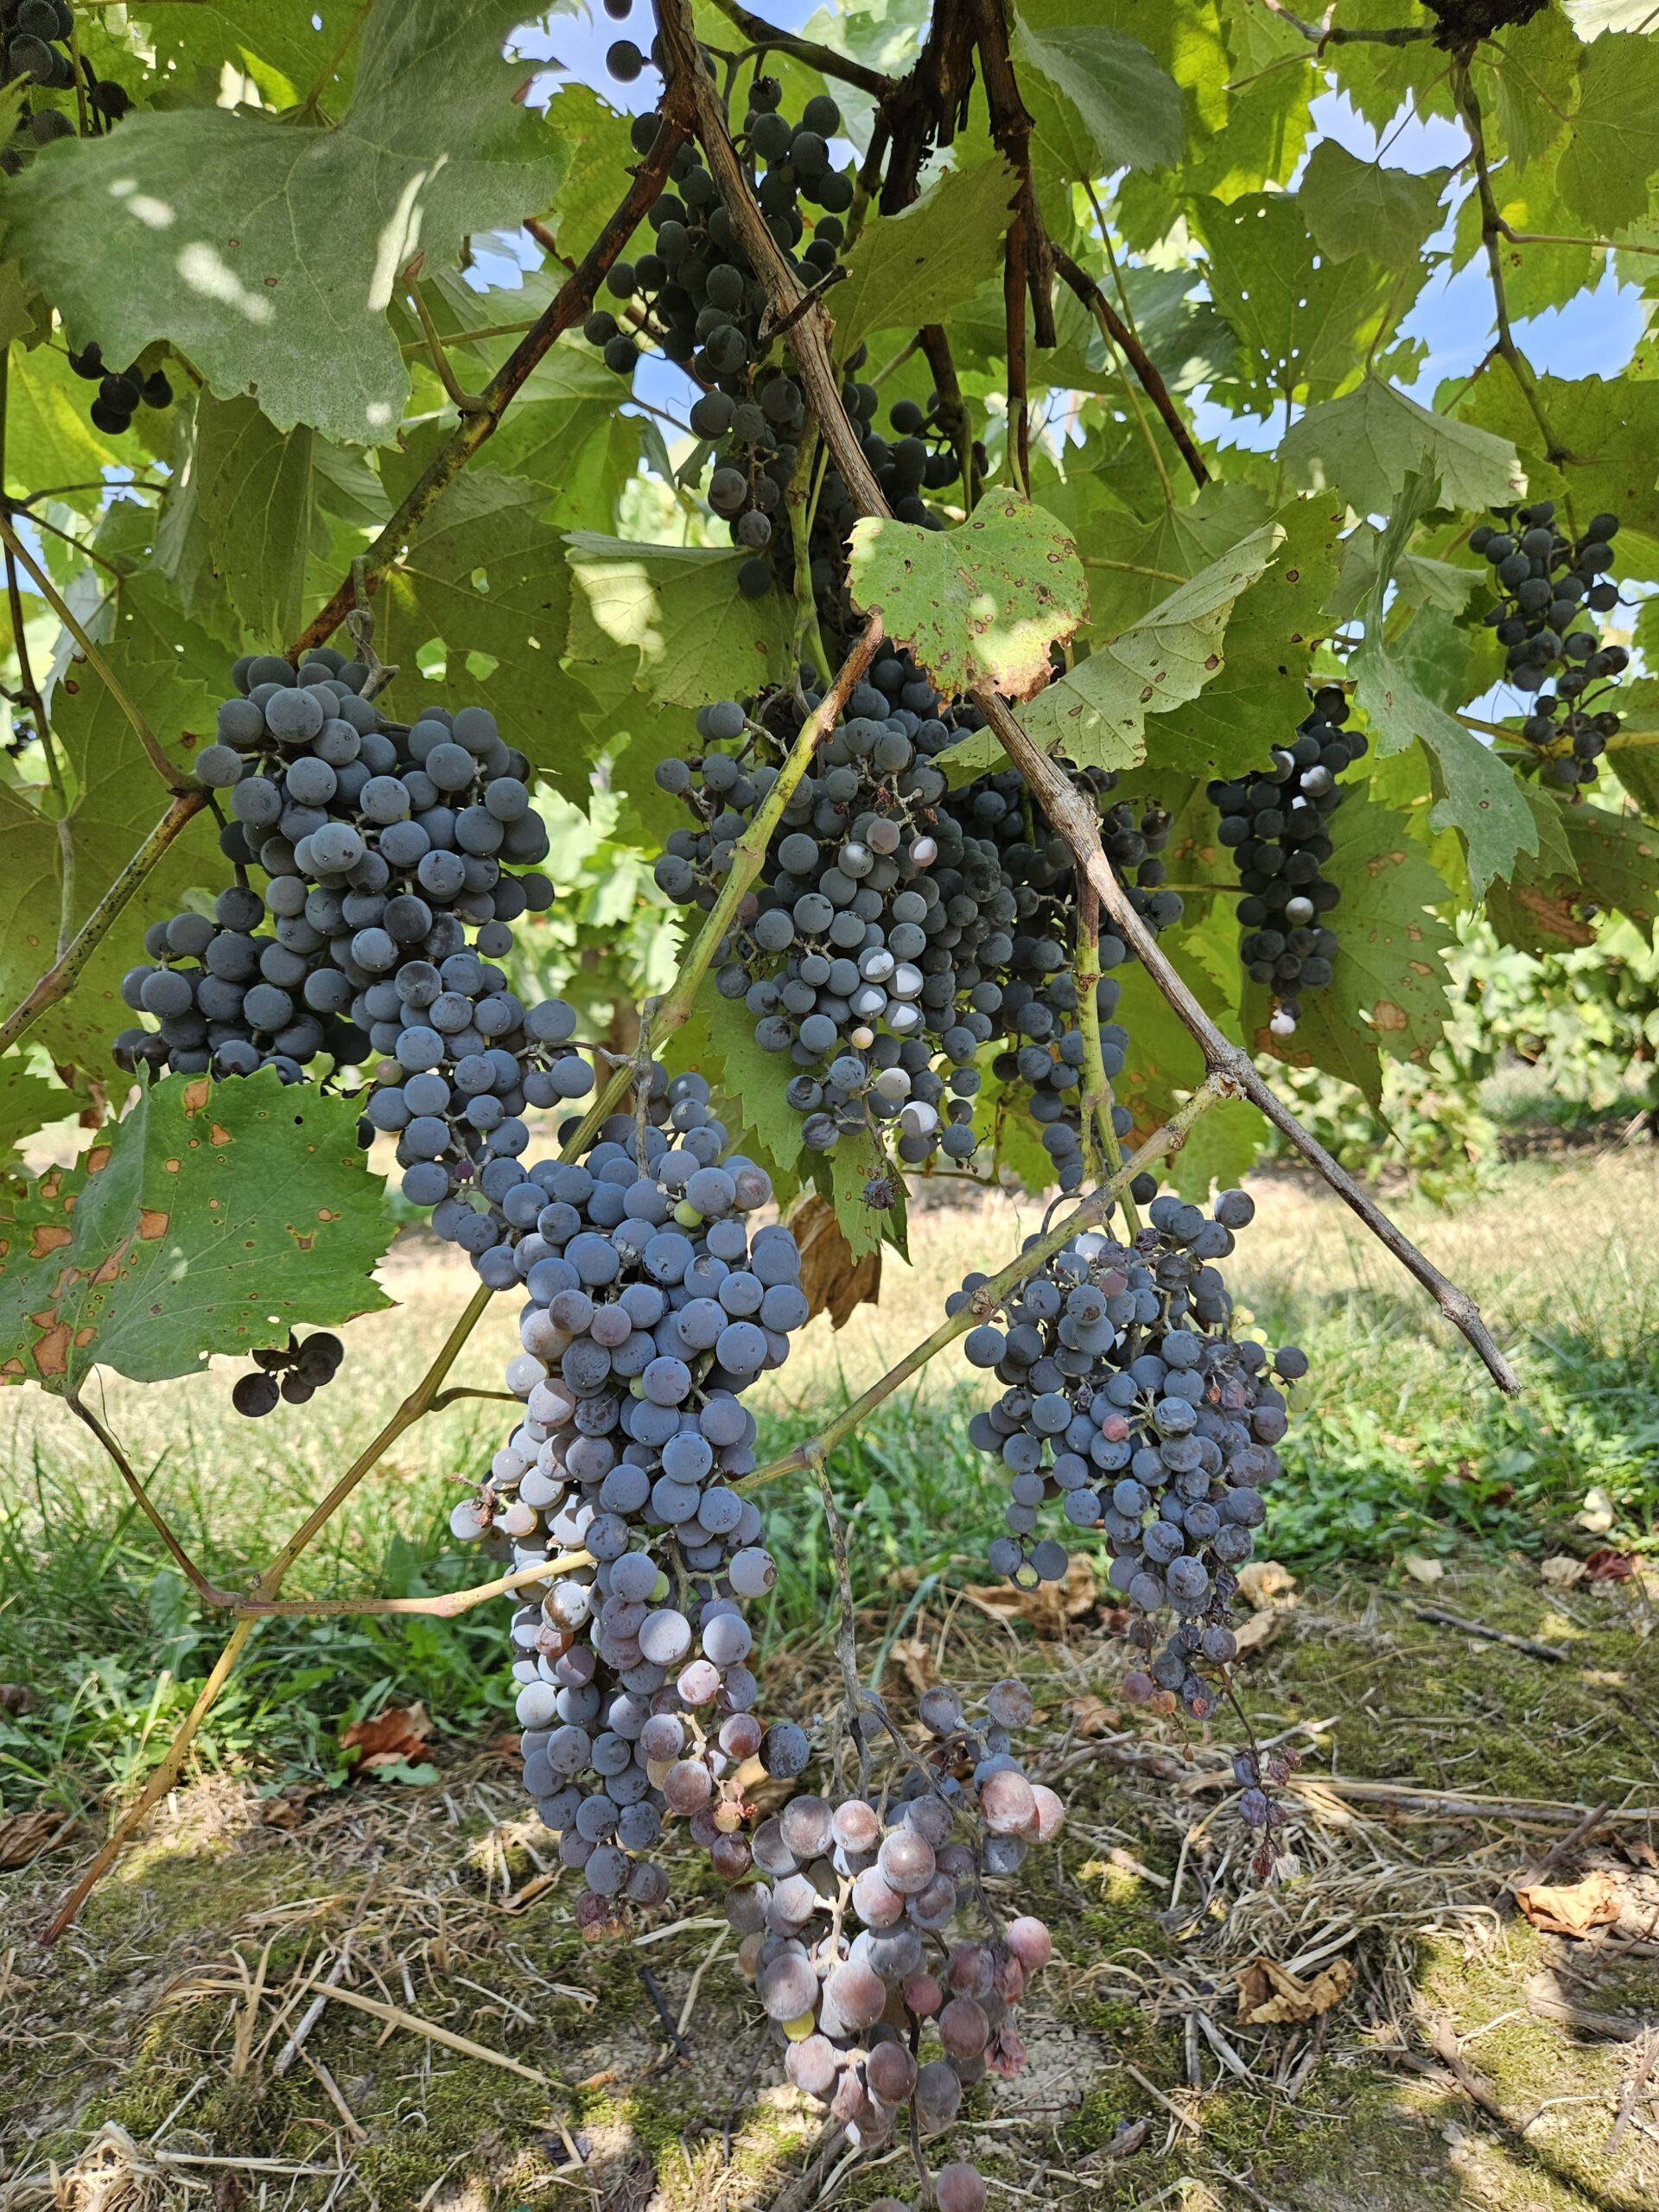 Bunches of red grapes hang from a vine